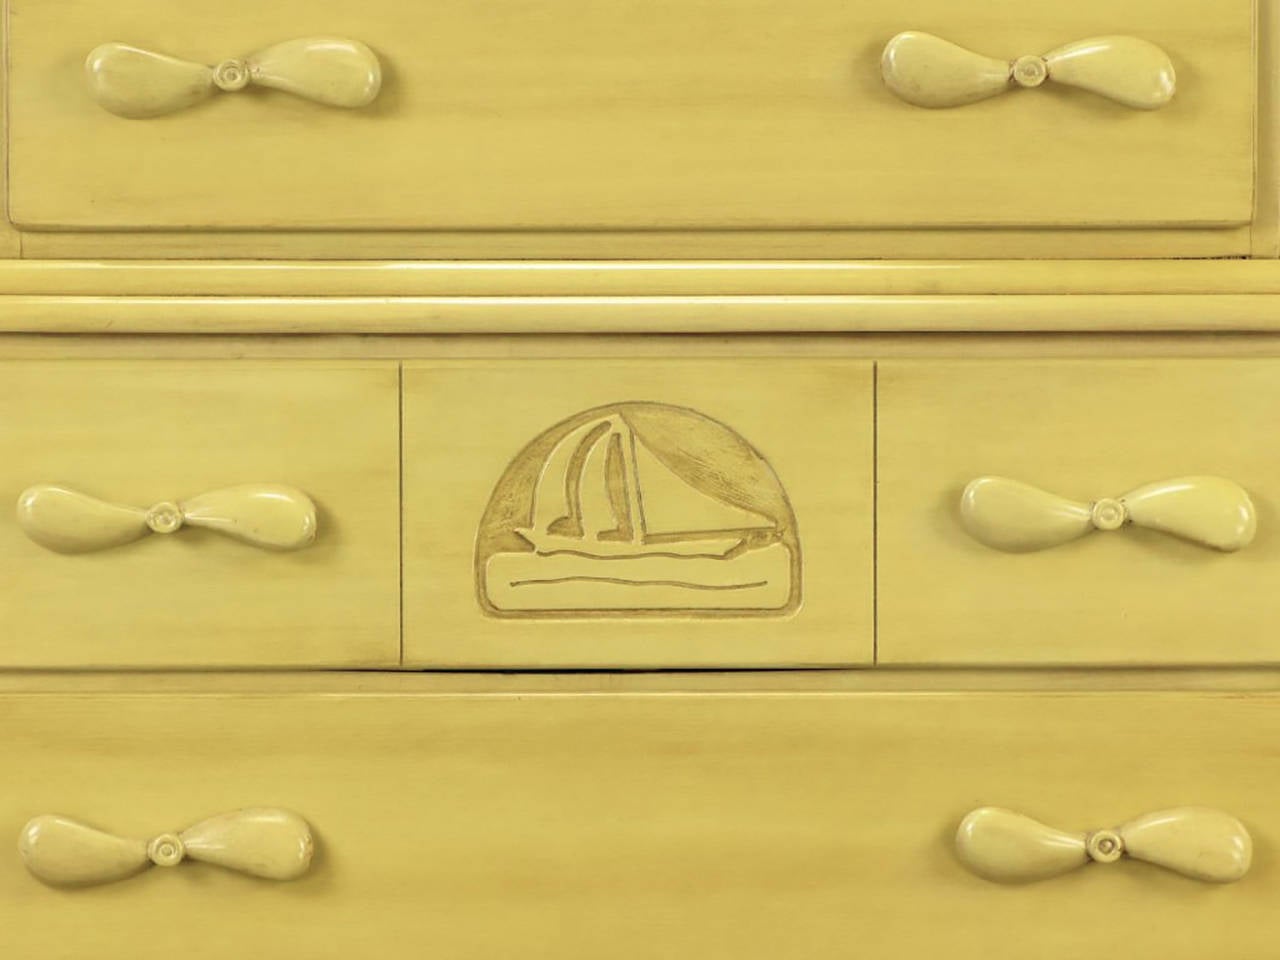 Mid-20th Century Pair of Five-Drawer Tall Chests with Propeller Pulls and Sailboat Reliefs